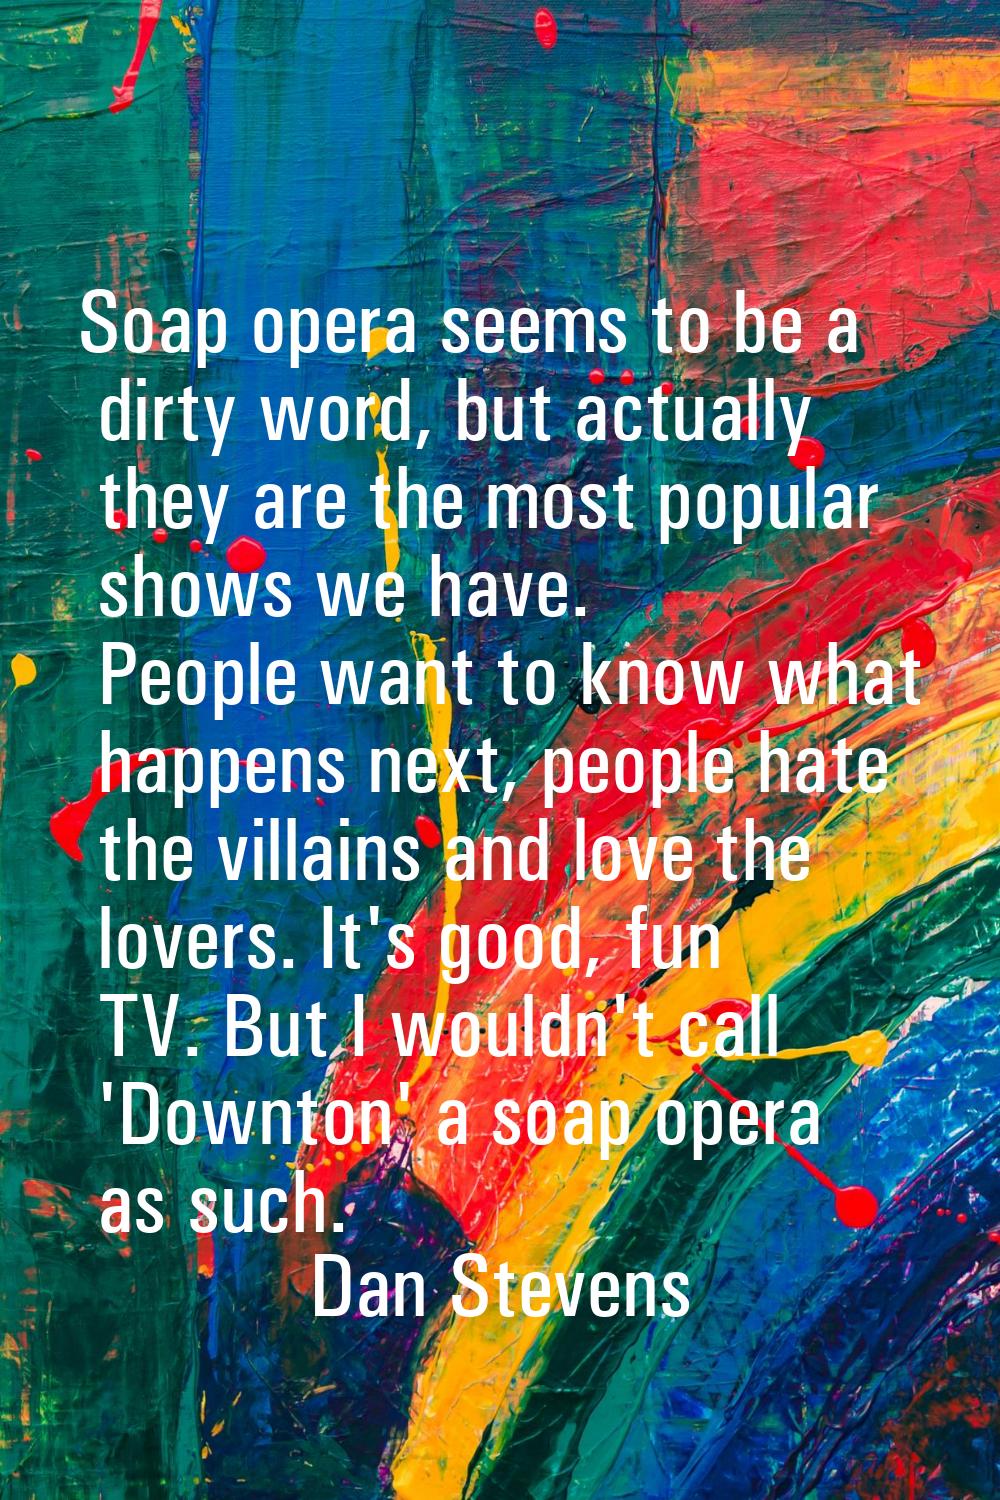 Soap opera seems to be a dirty word, but actually they are the most popular shows we have. People w